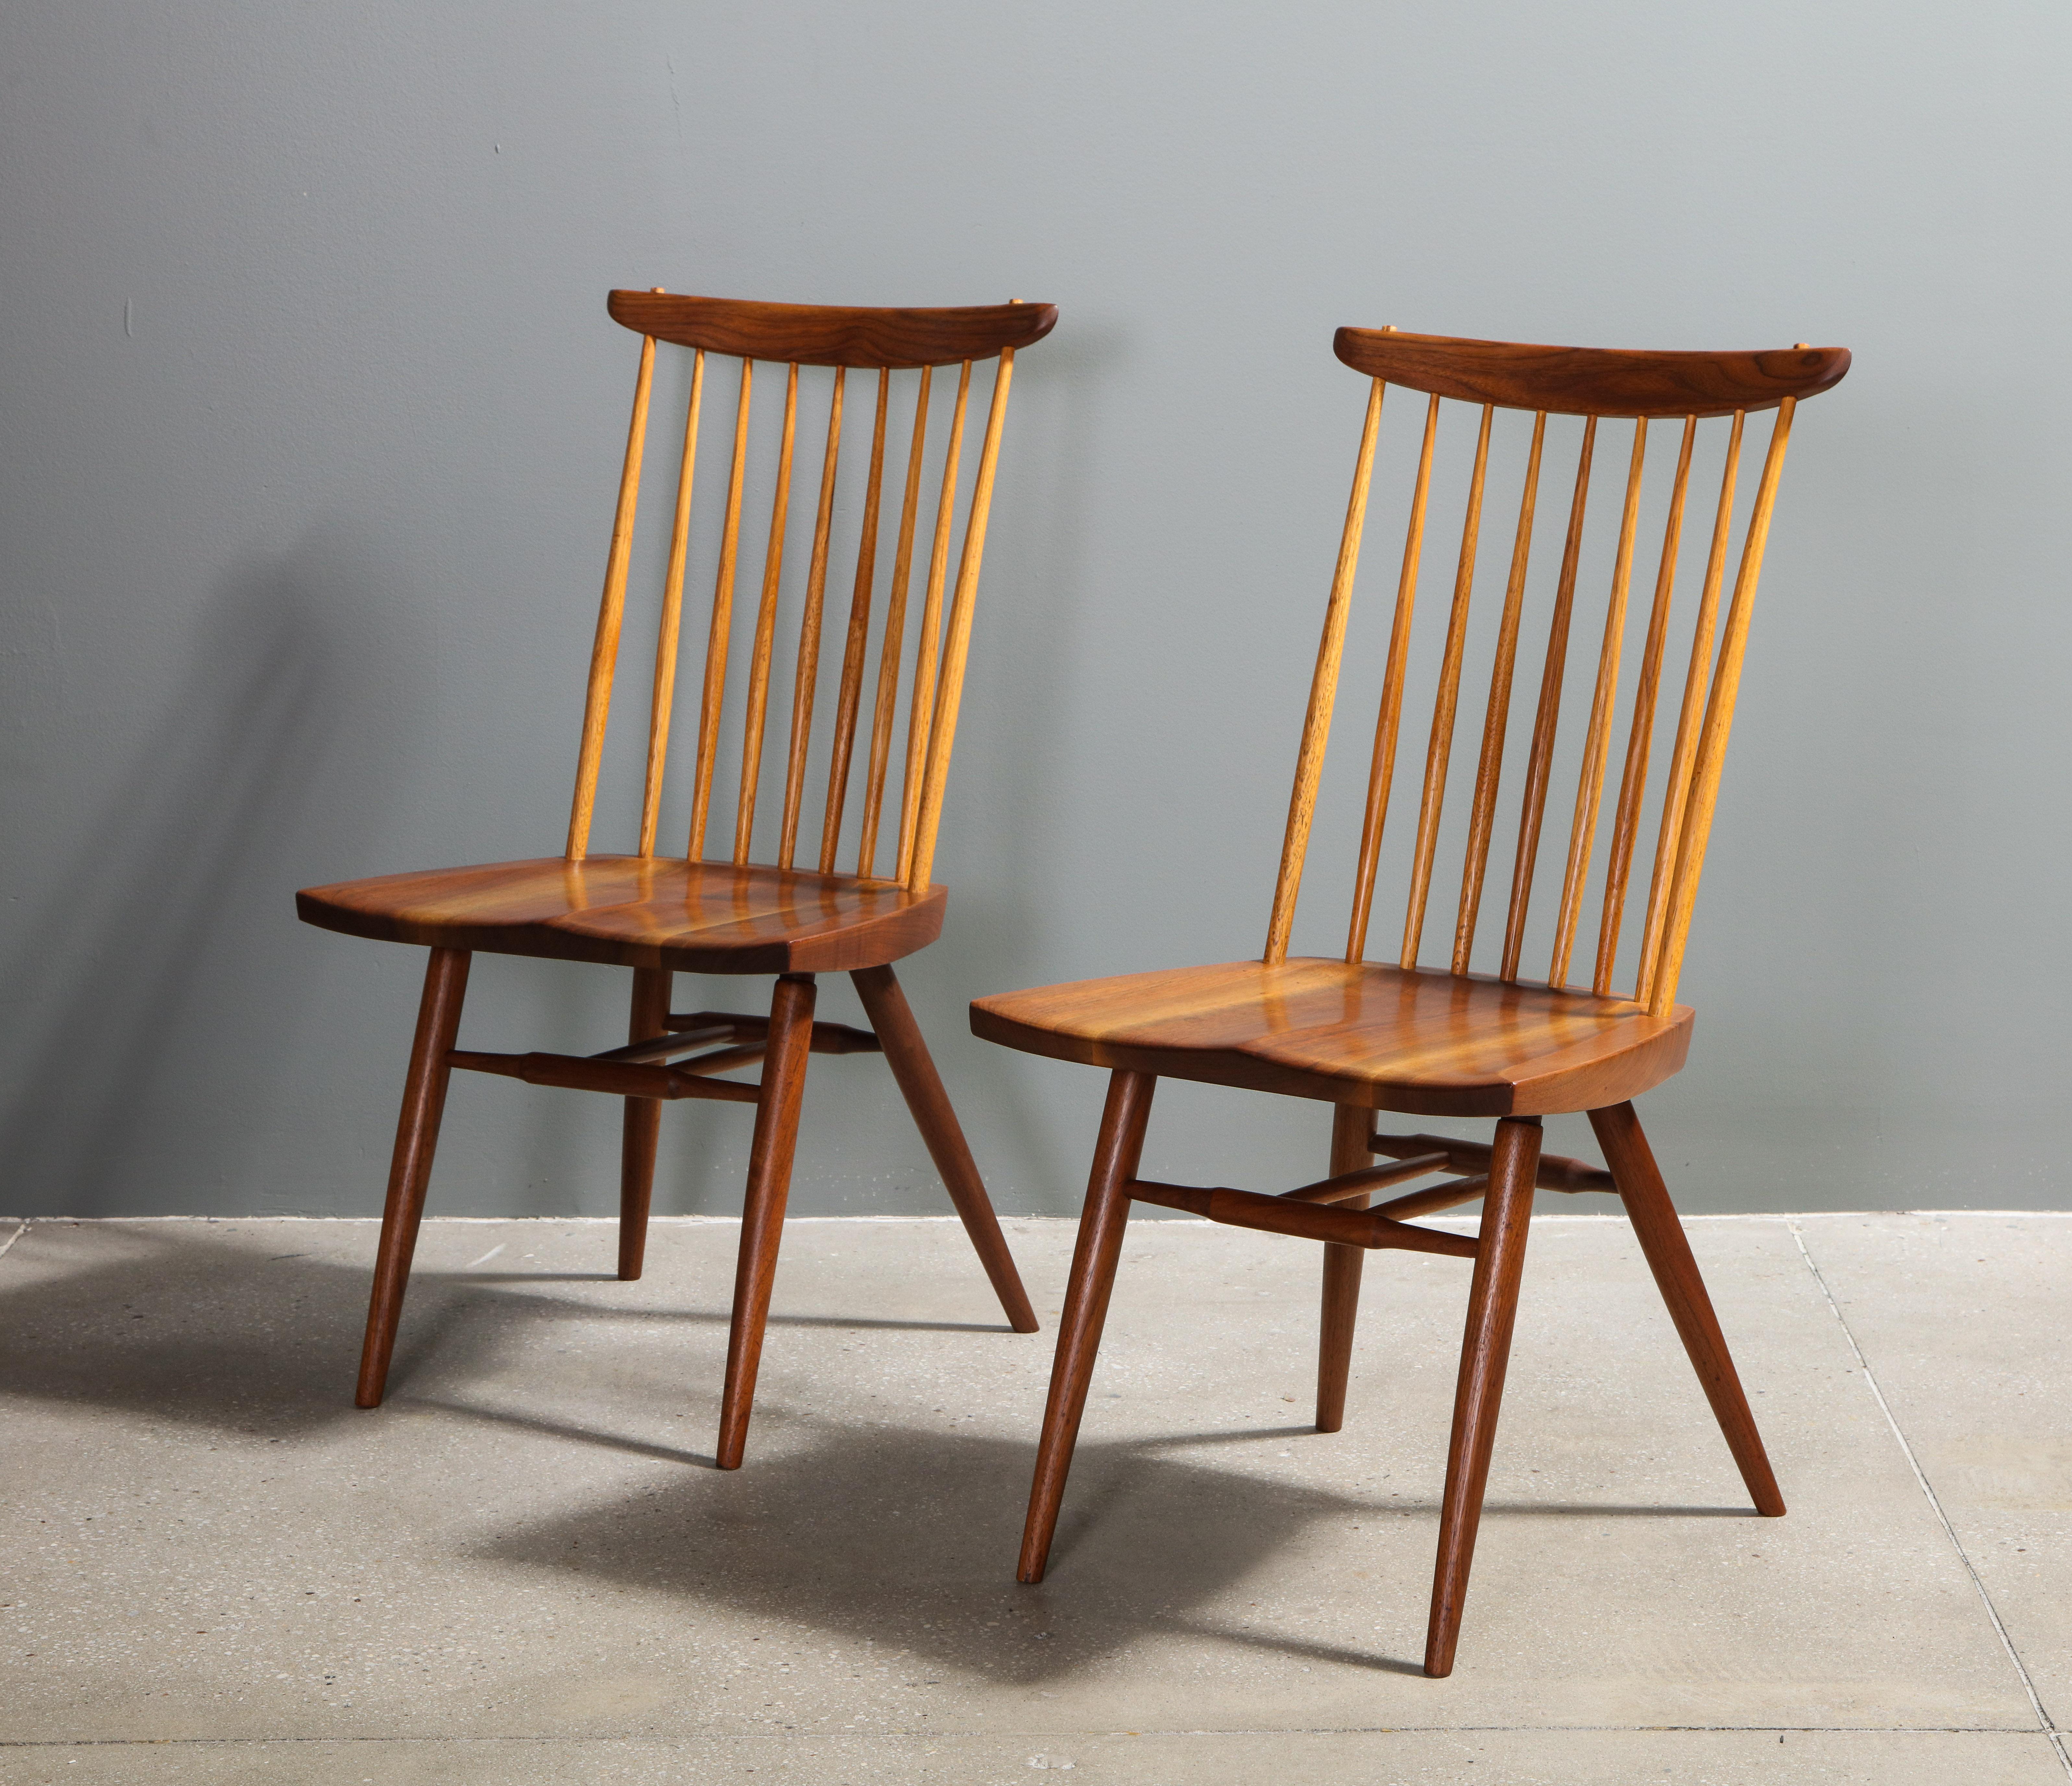 The walnut side chairs. Each with a beautifully grained seat and inscribed with client's name 